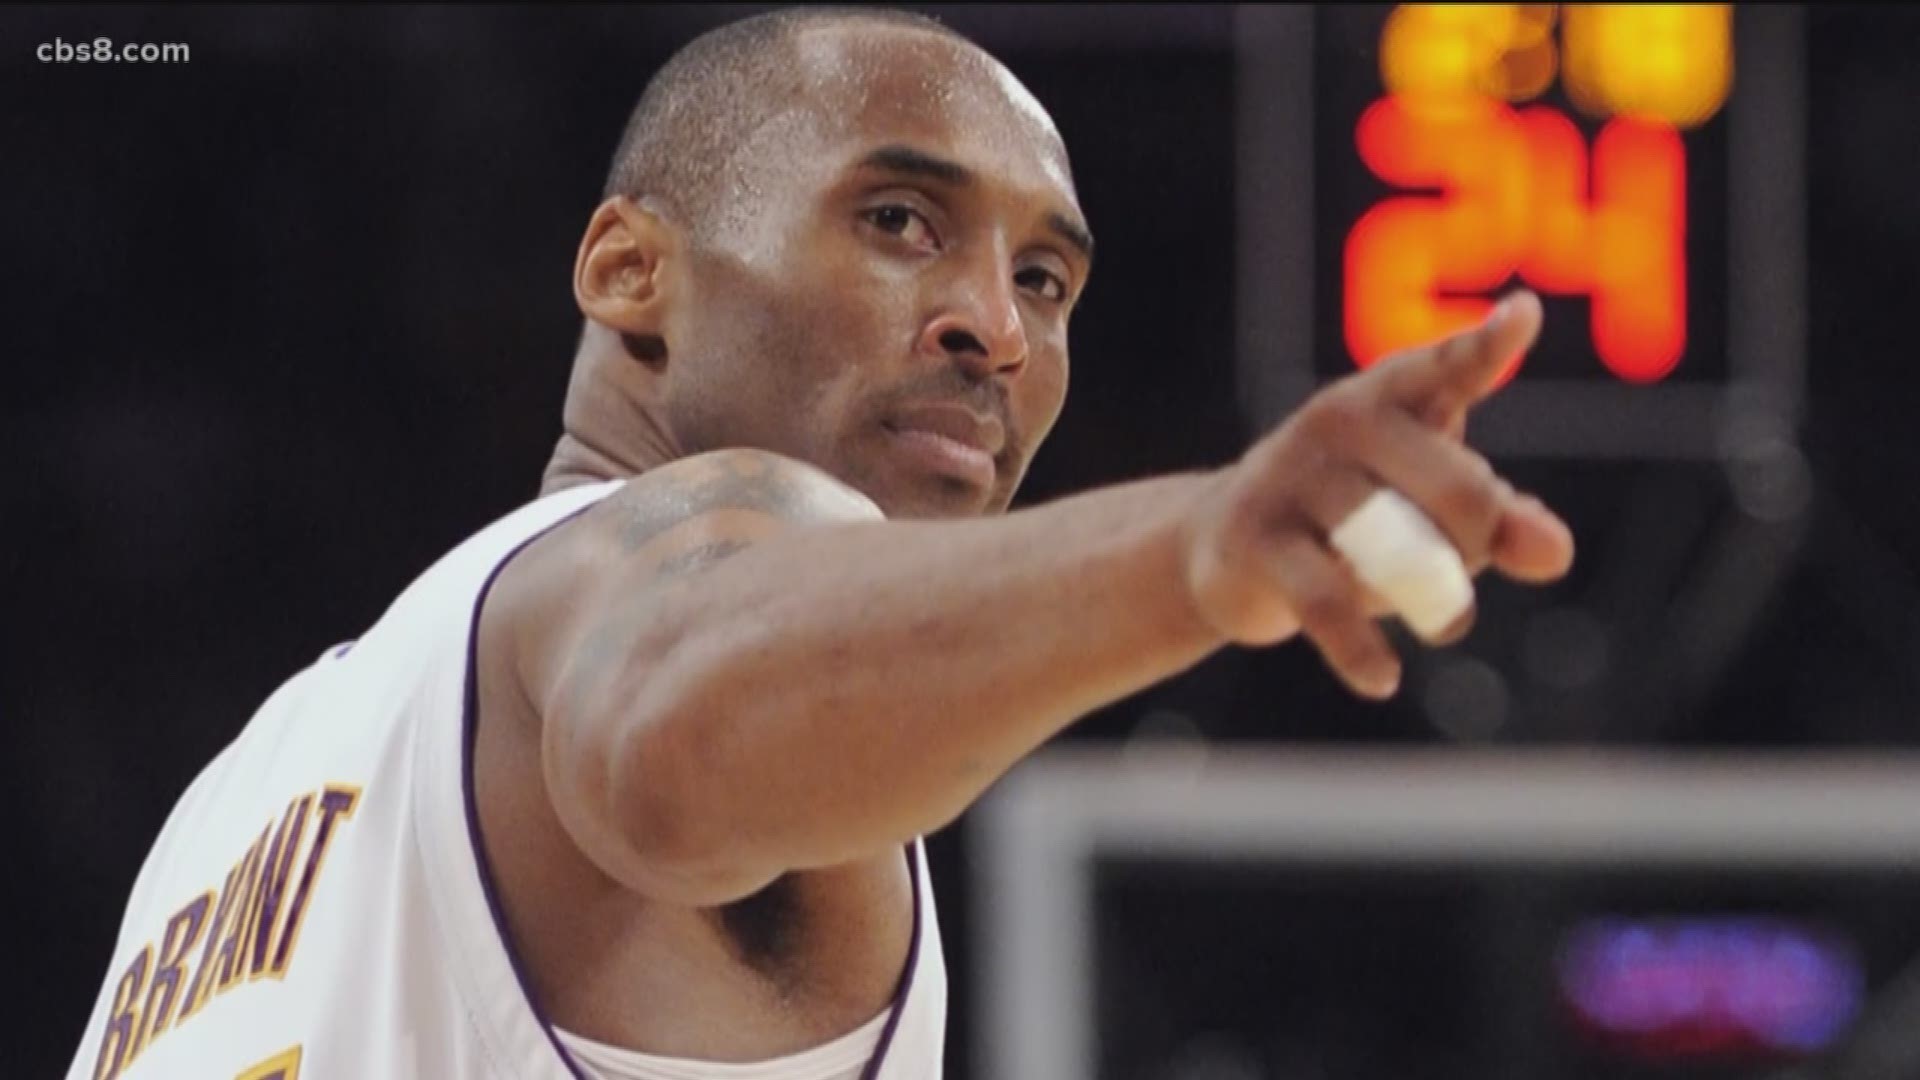 Kobe, his daughter, and seven others died on Sunday in Calabasas.